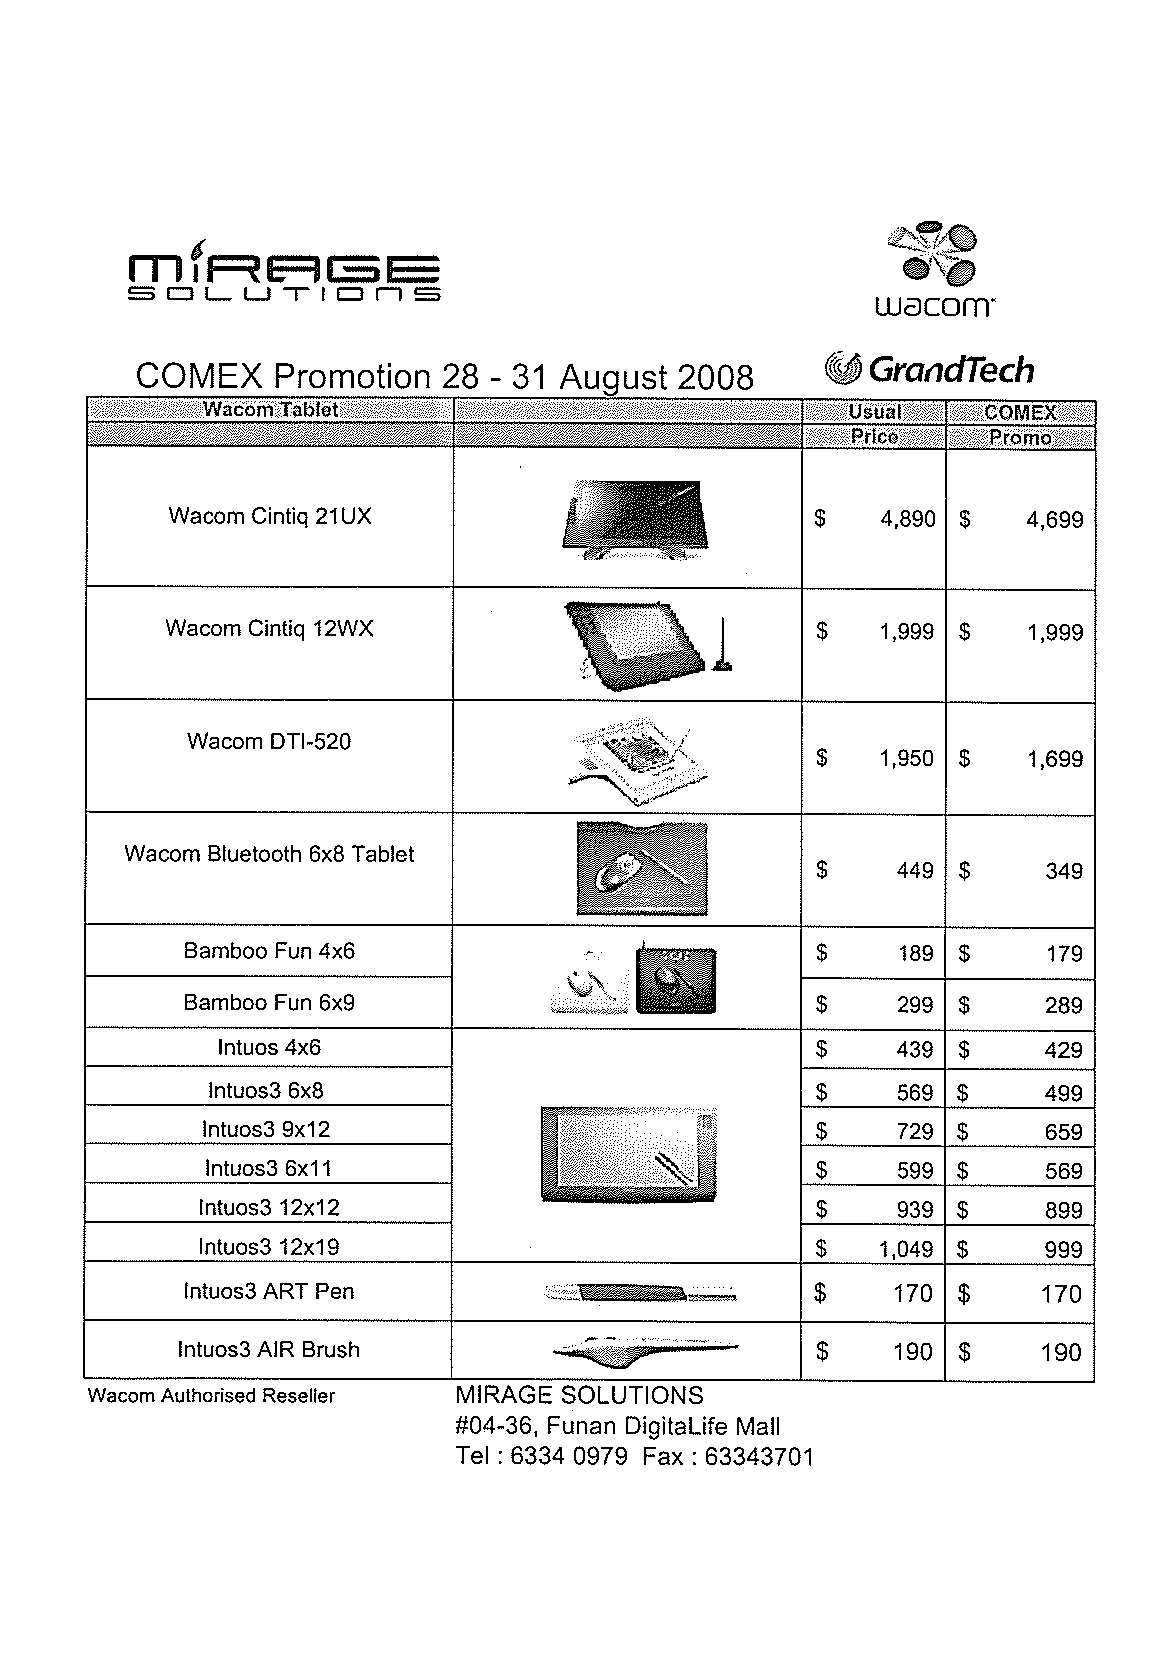 Comex 2008 price list image brochure of Mirage Solutions